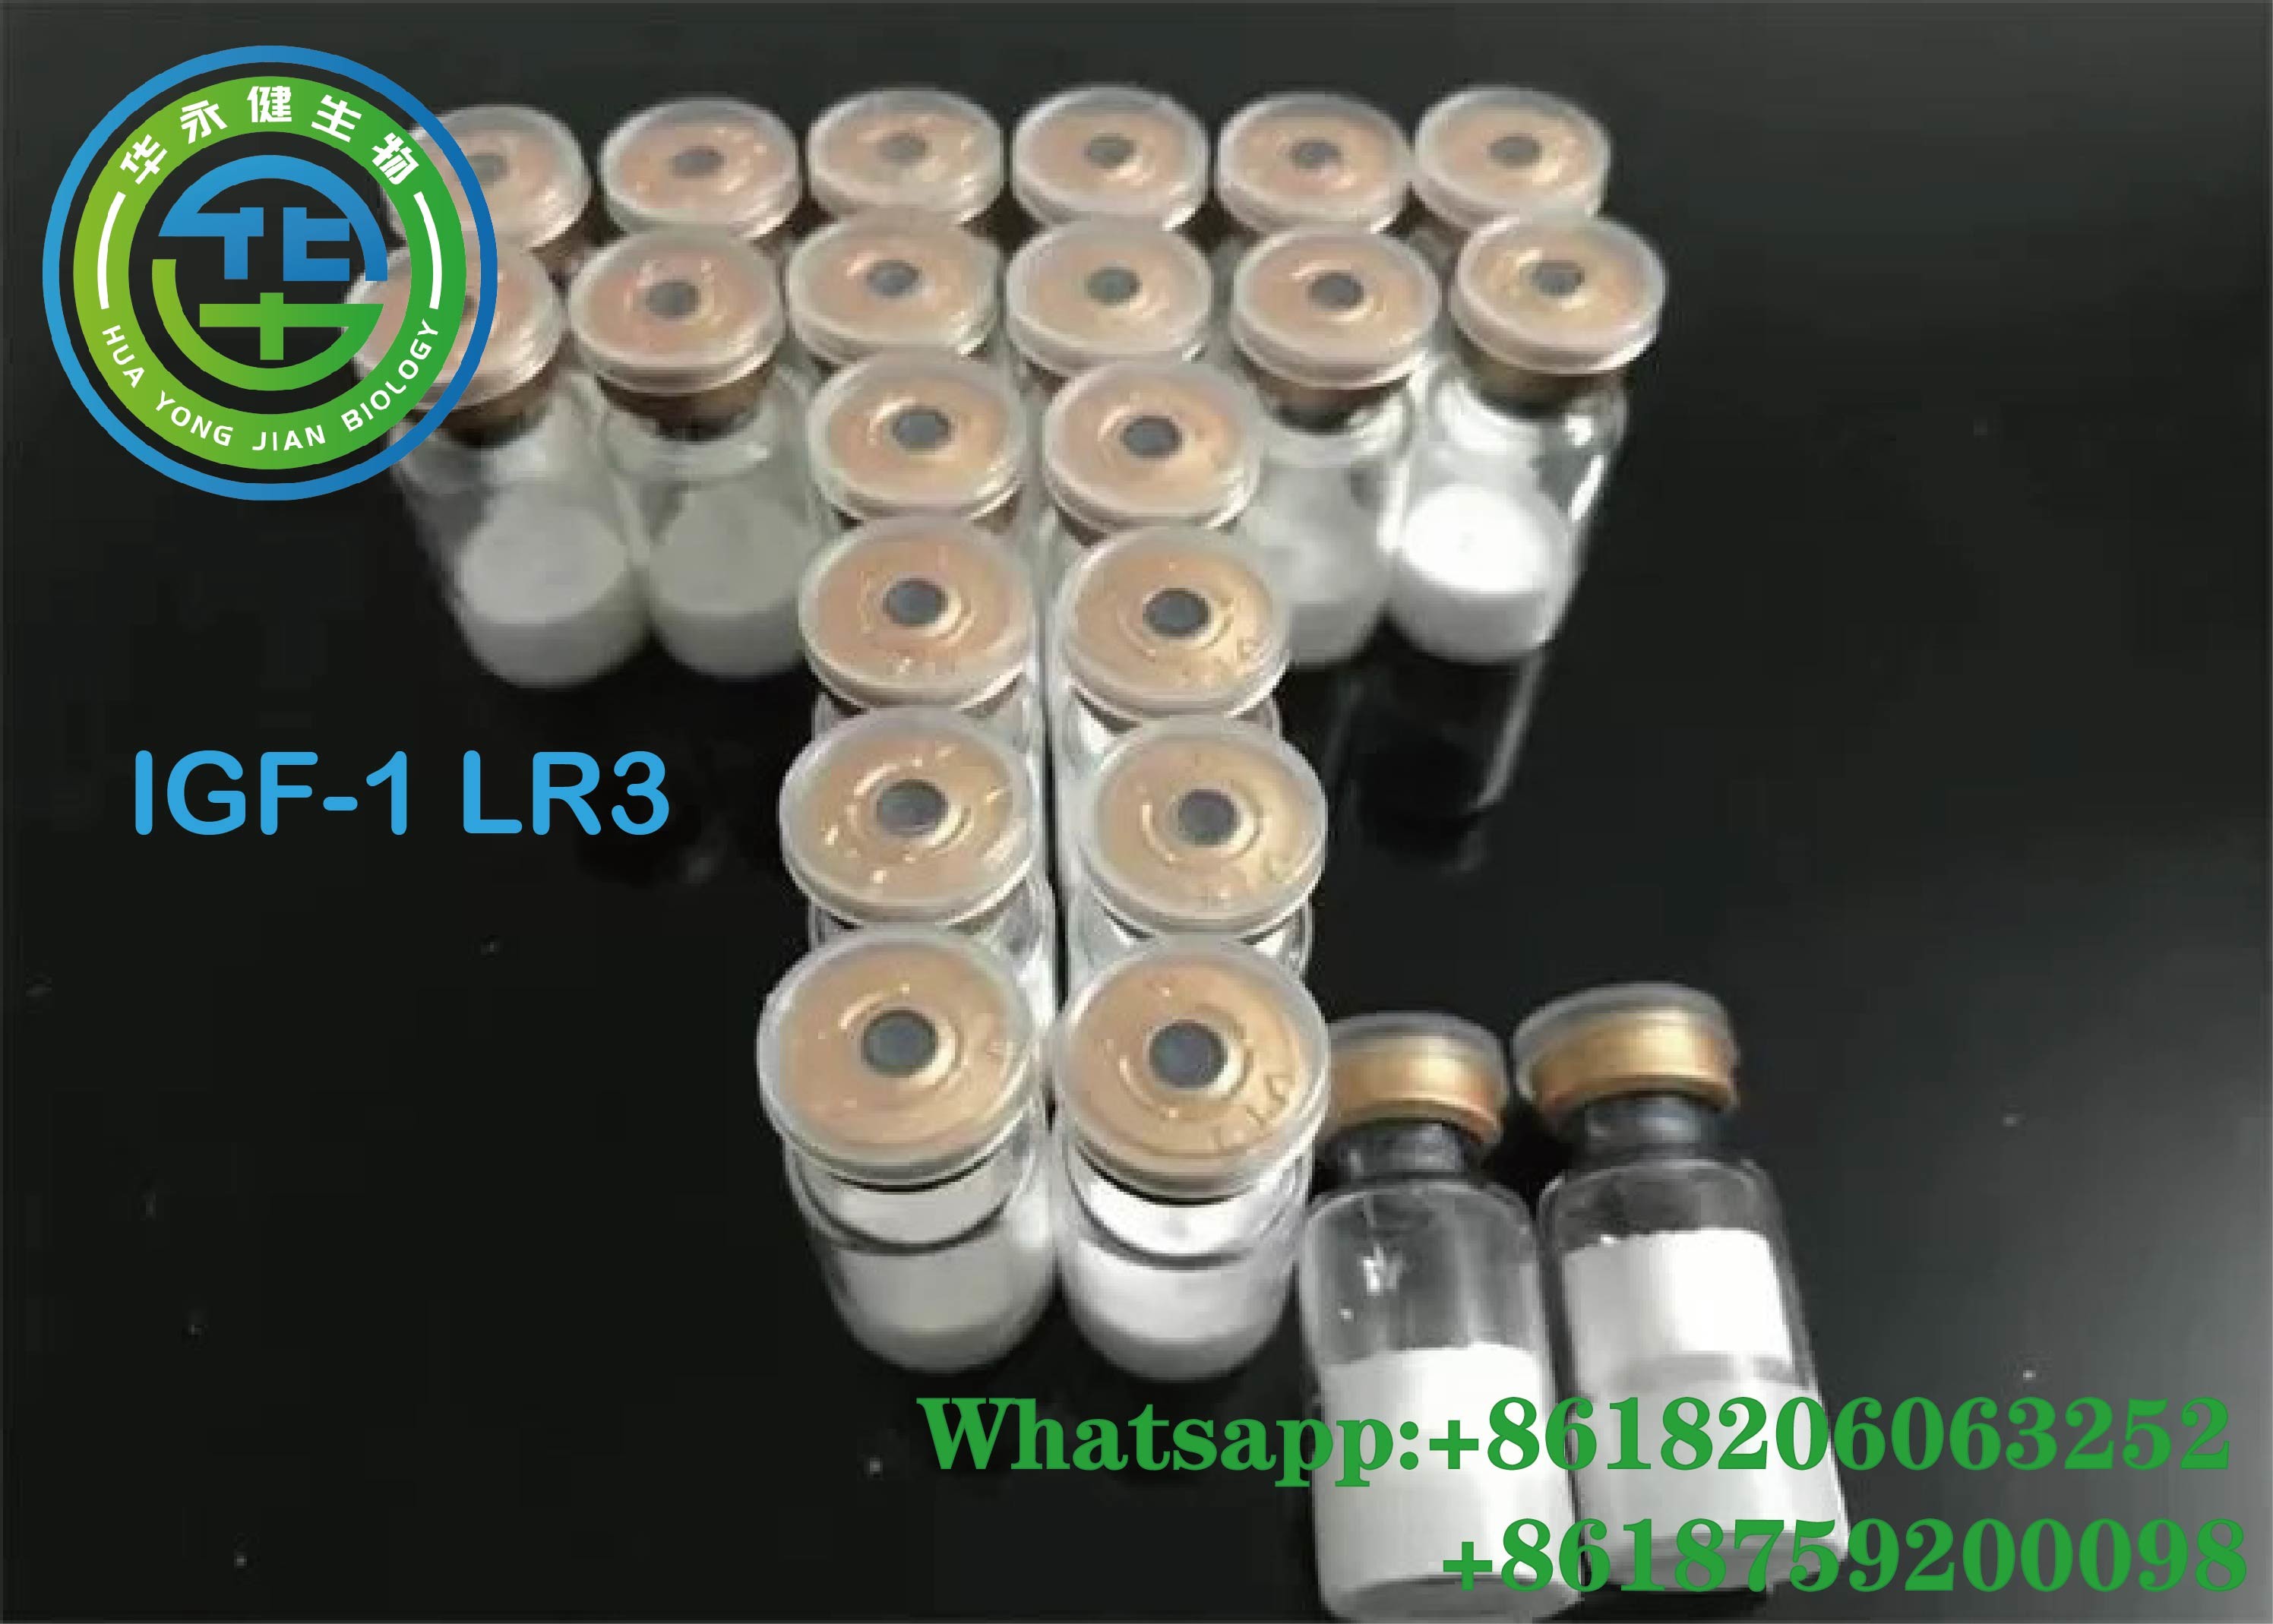 Wholesale Cycle Iigf-1 Lr3 For Fat Loss 1 Peptides Steroids Gaining Strength Cas NO 946870-92-4 from china suppliers